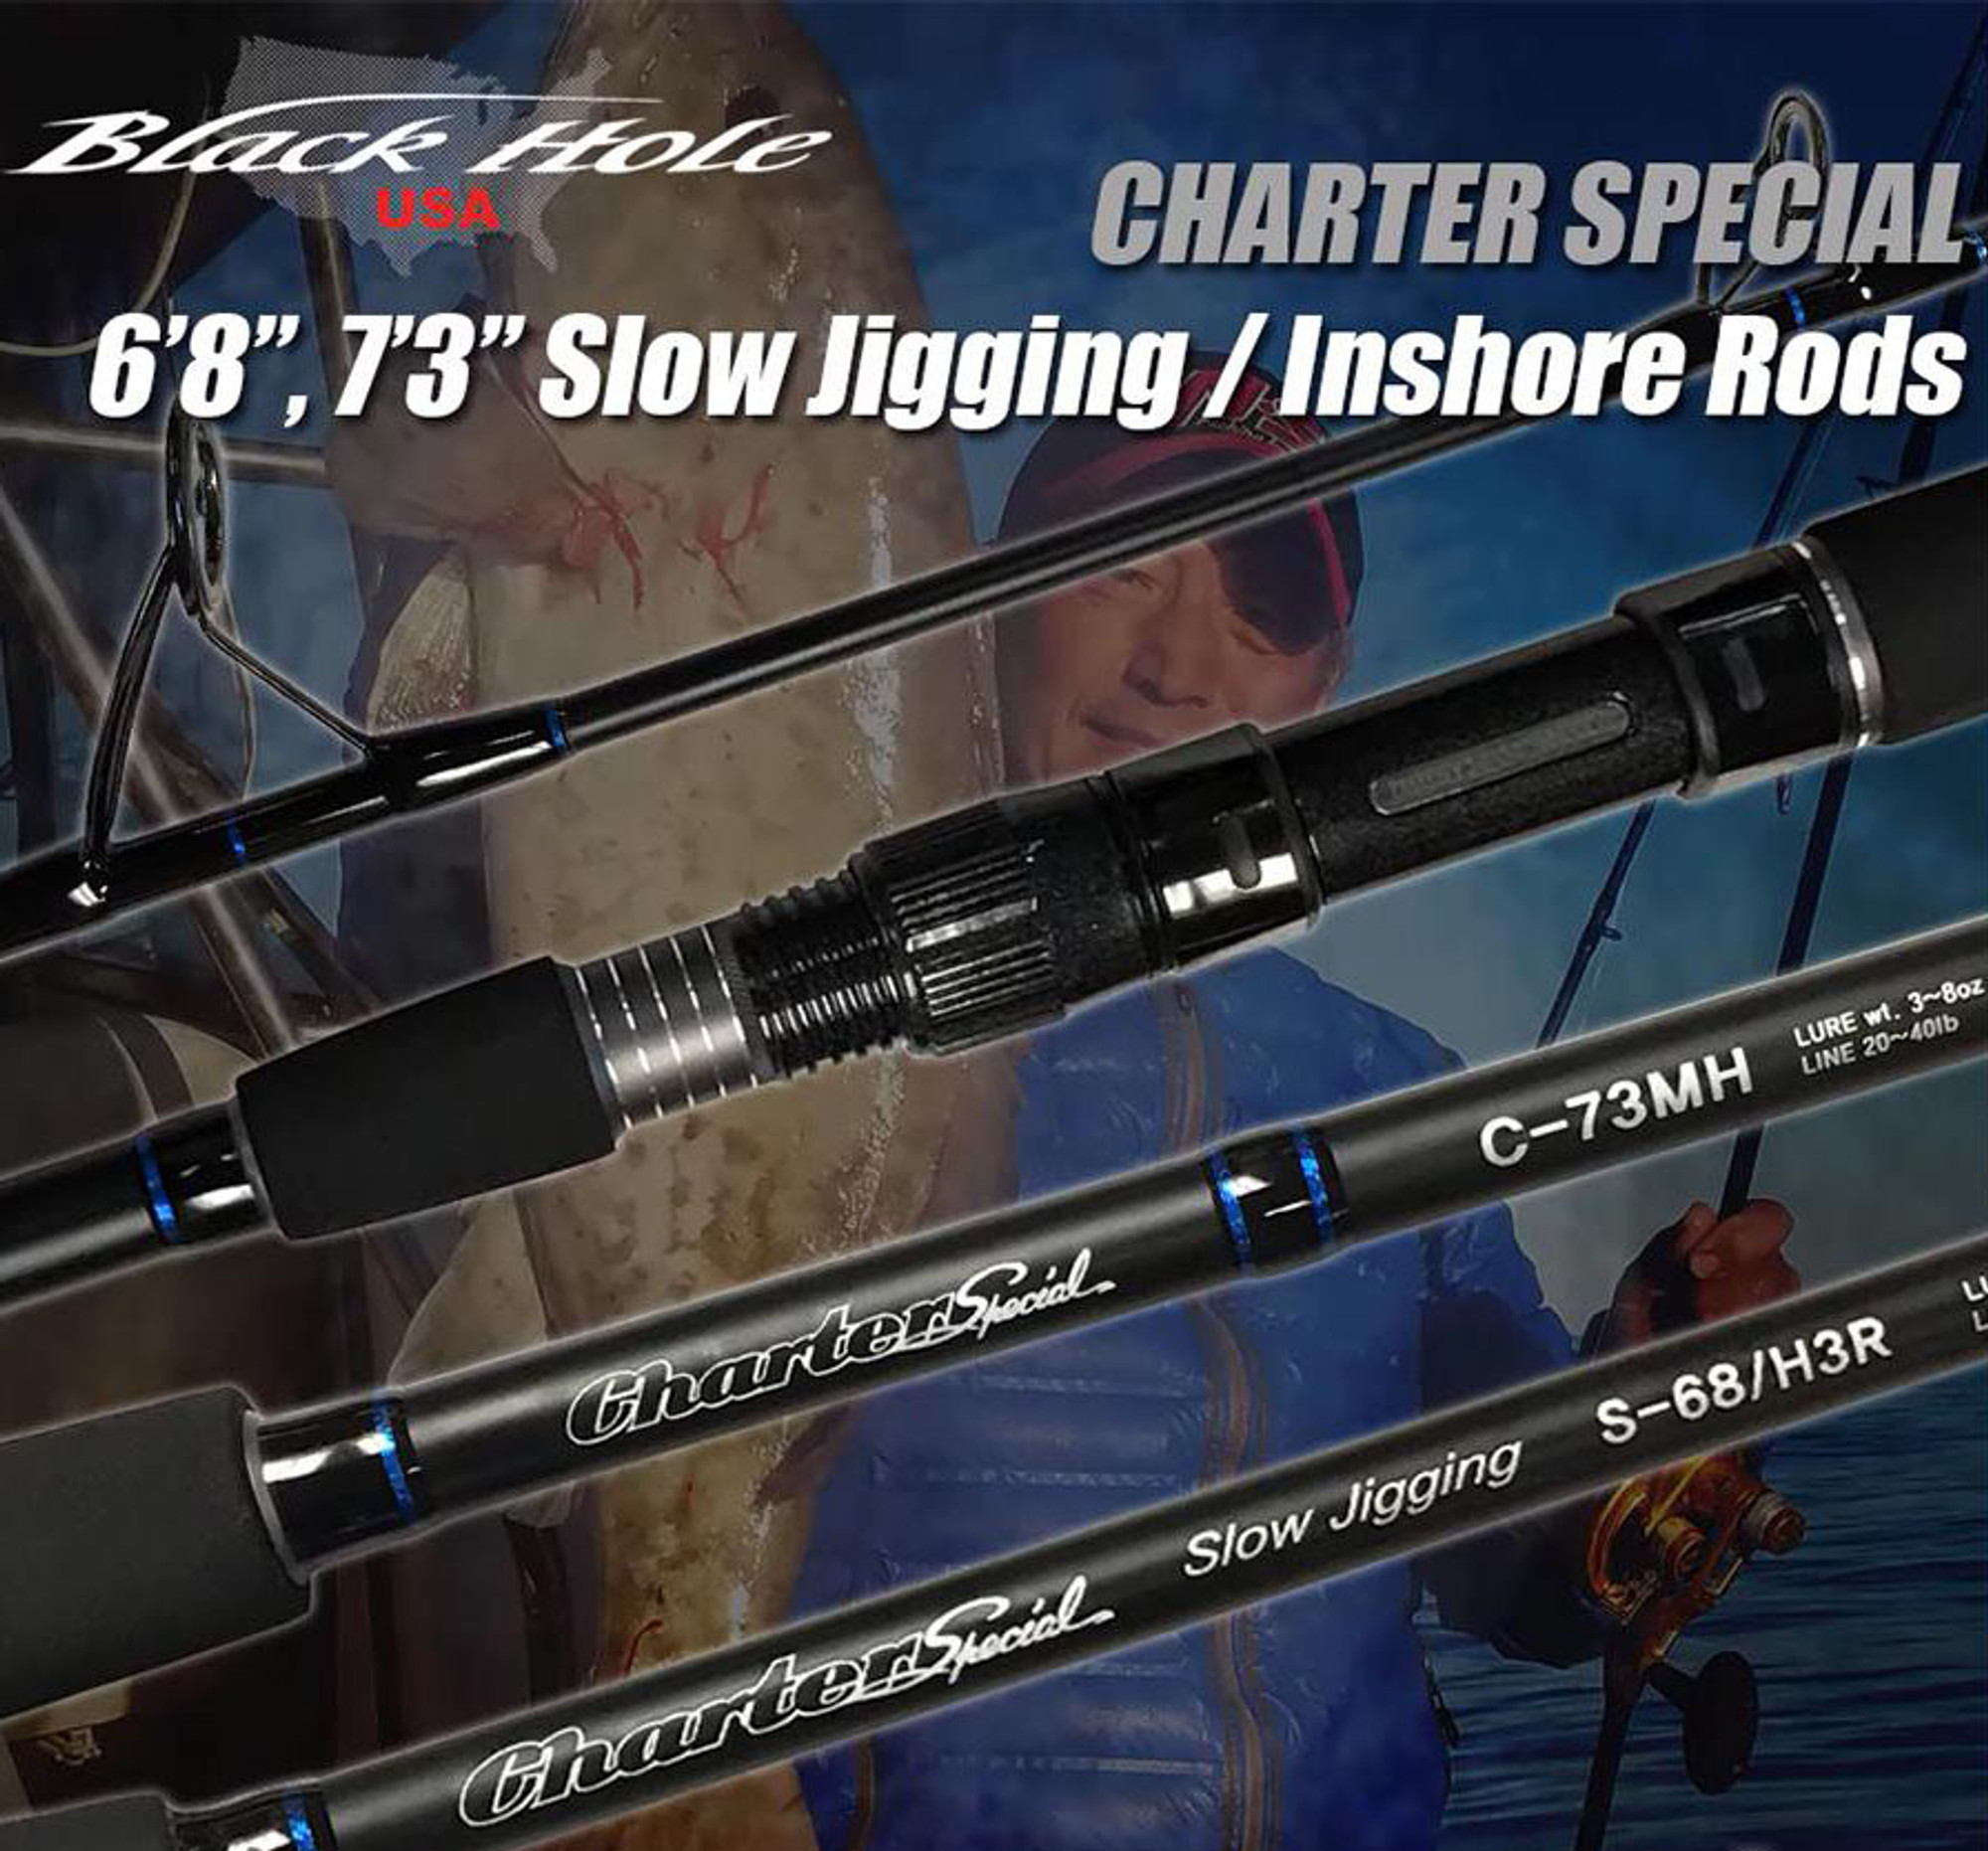 Black Hole Charter Special Inshore & Slow Pitch Jigging Rod (Model:  C-68/H3R) - Hero Outdoors